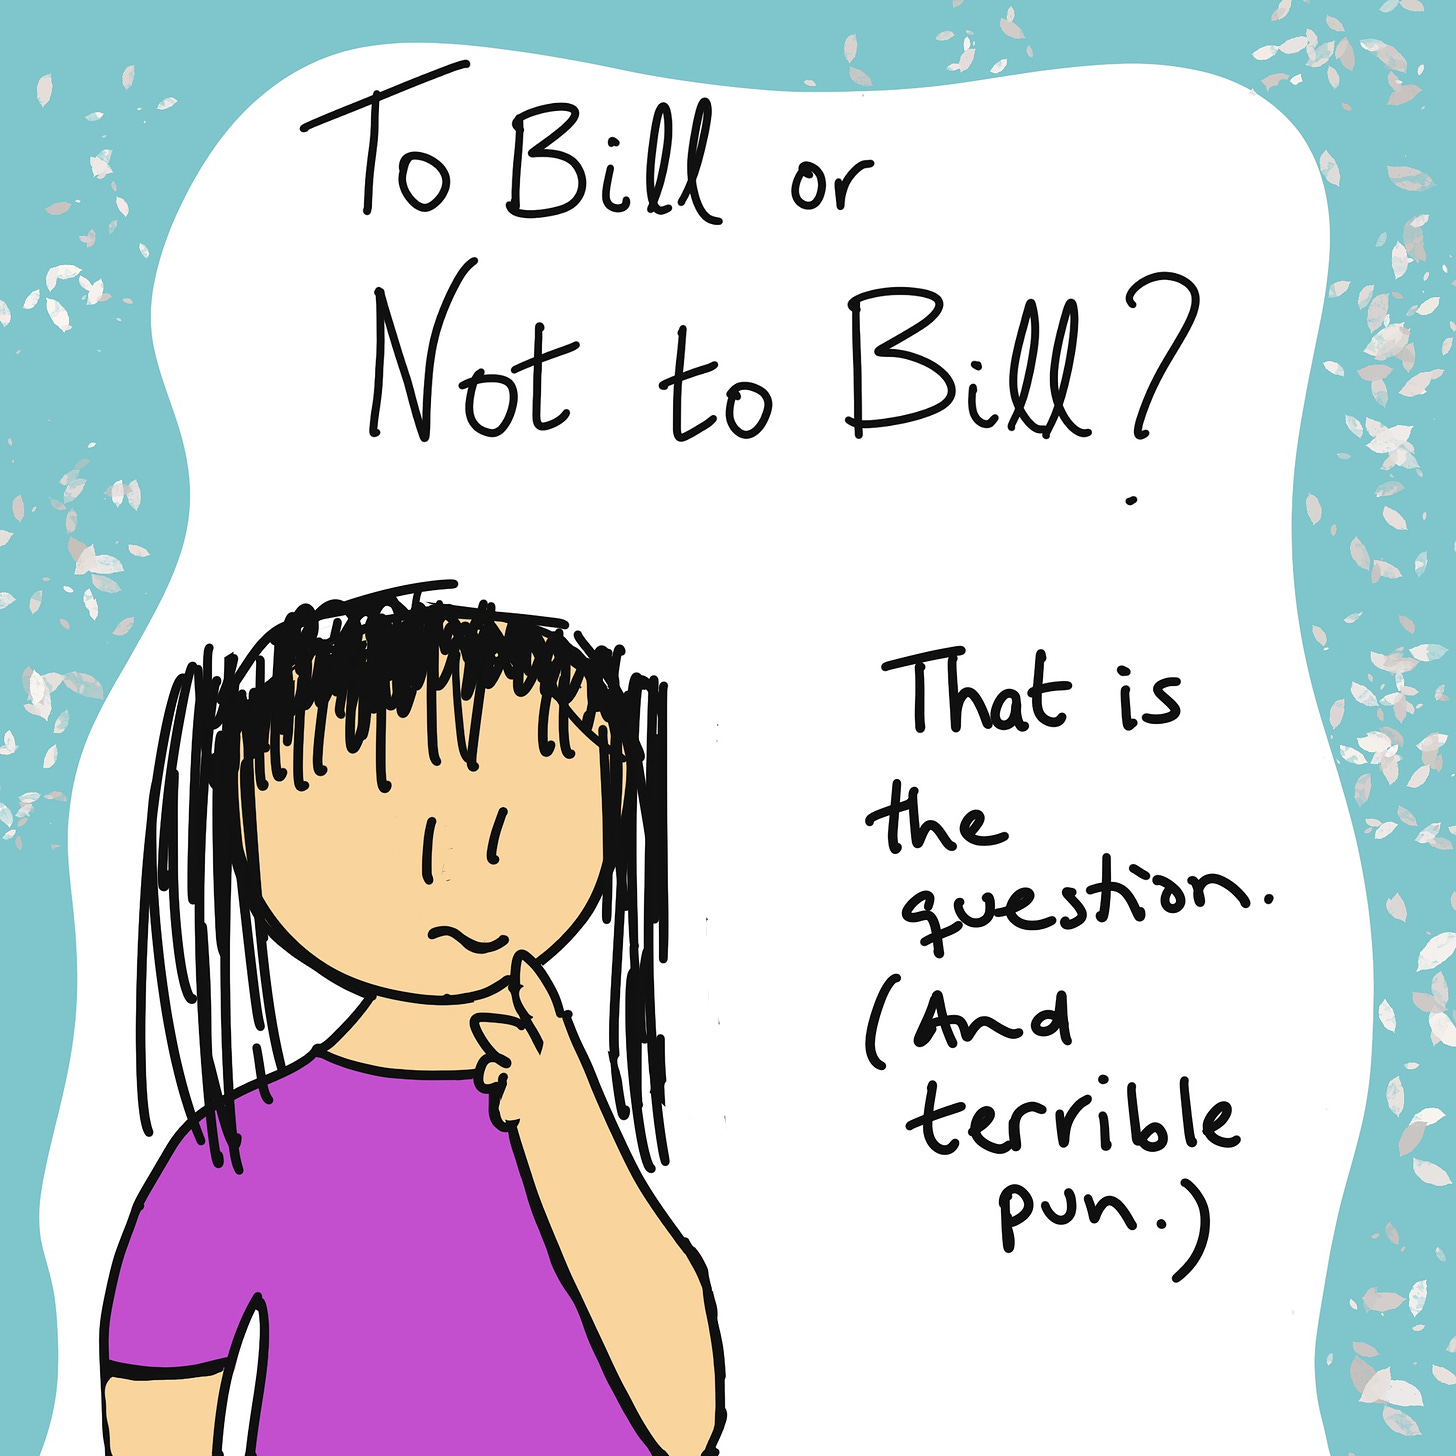 To Bill or Not to Bill? That is the question, and terrible pun.